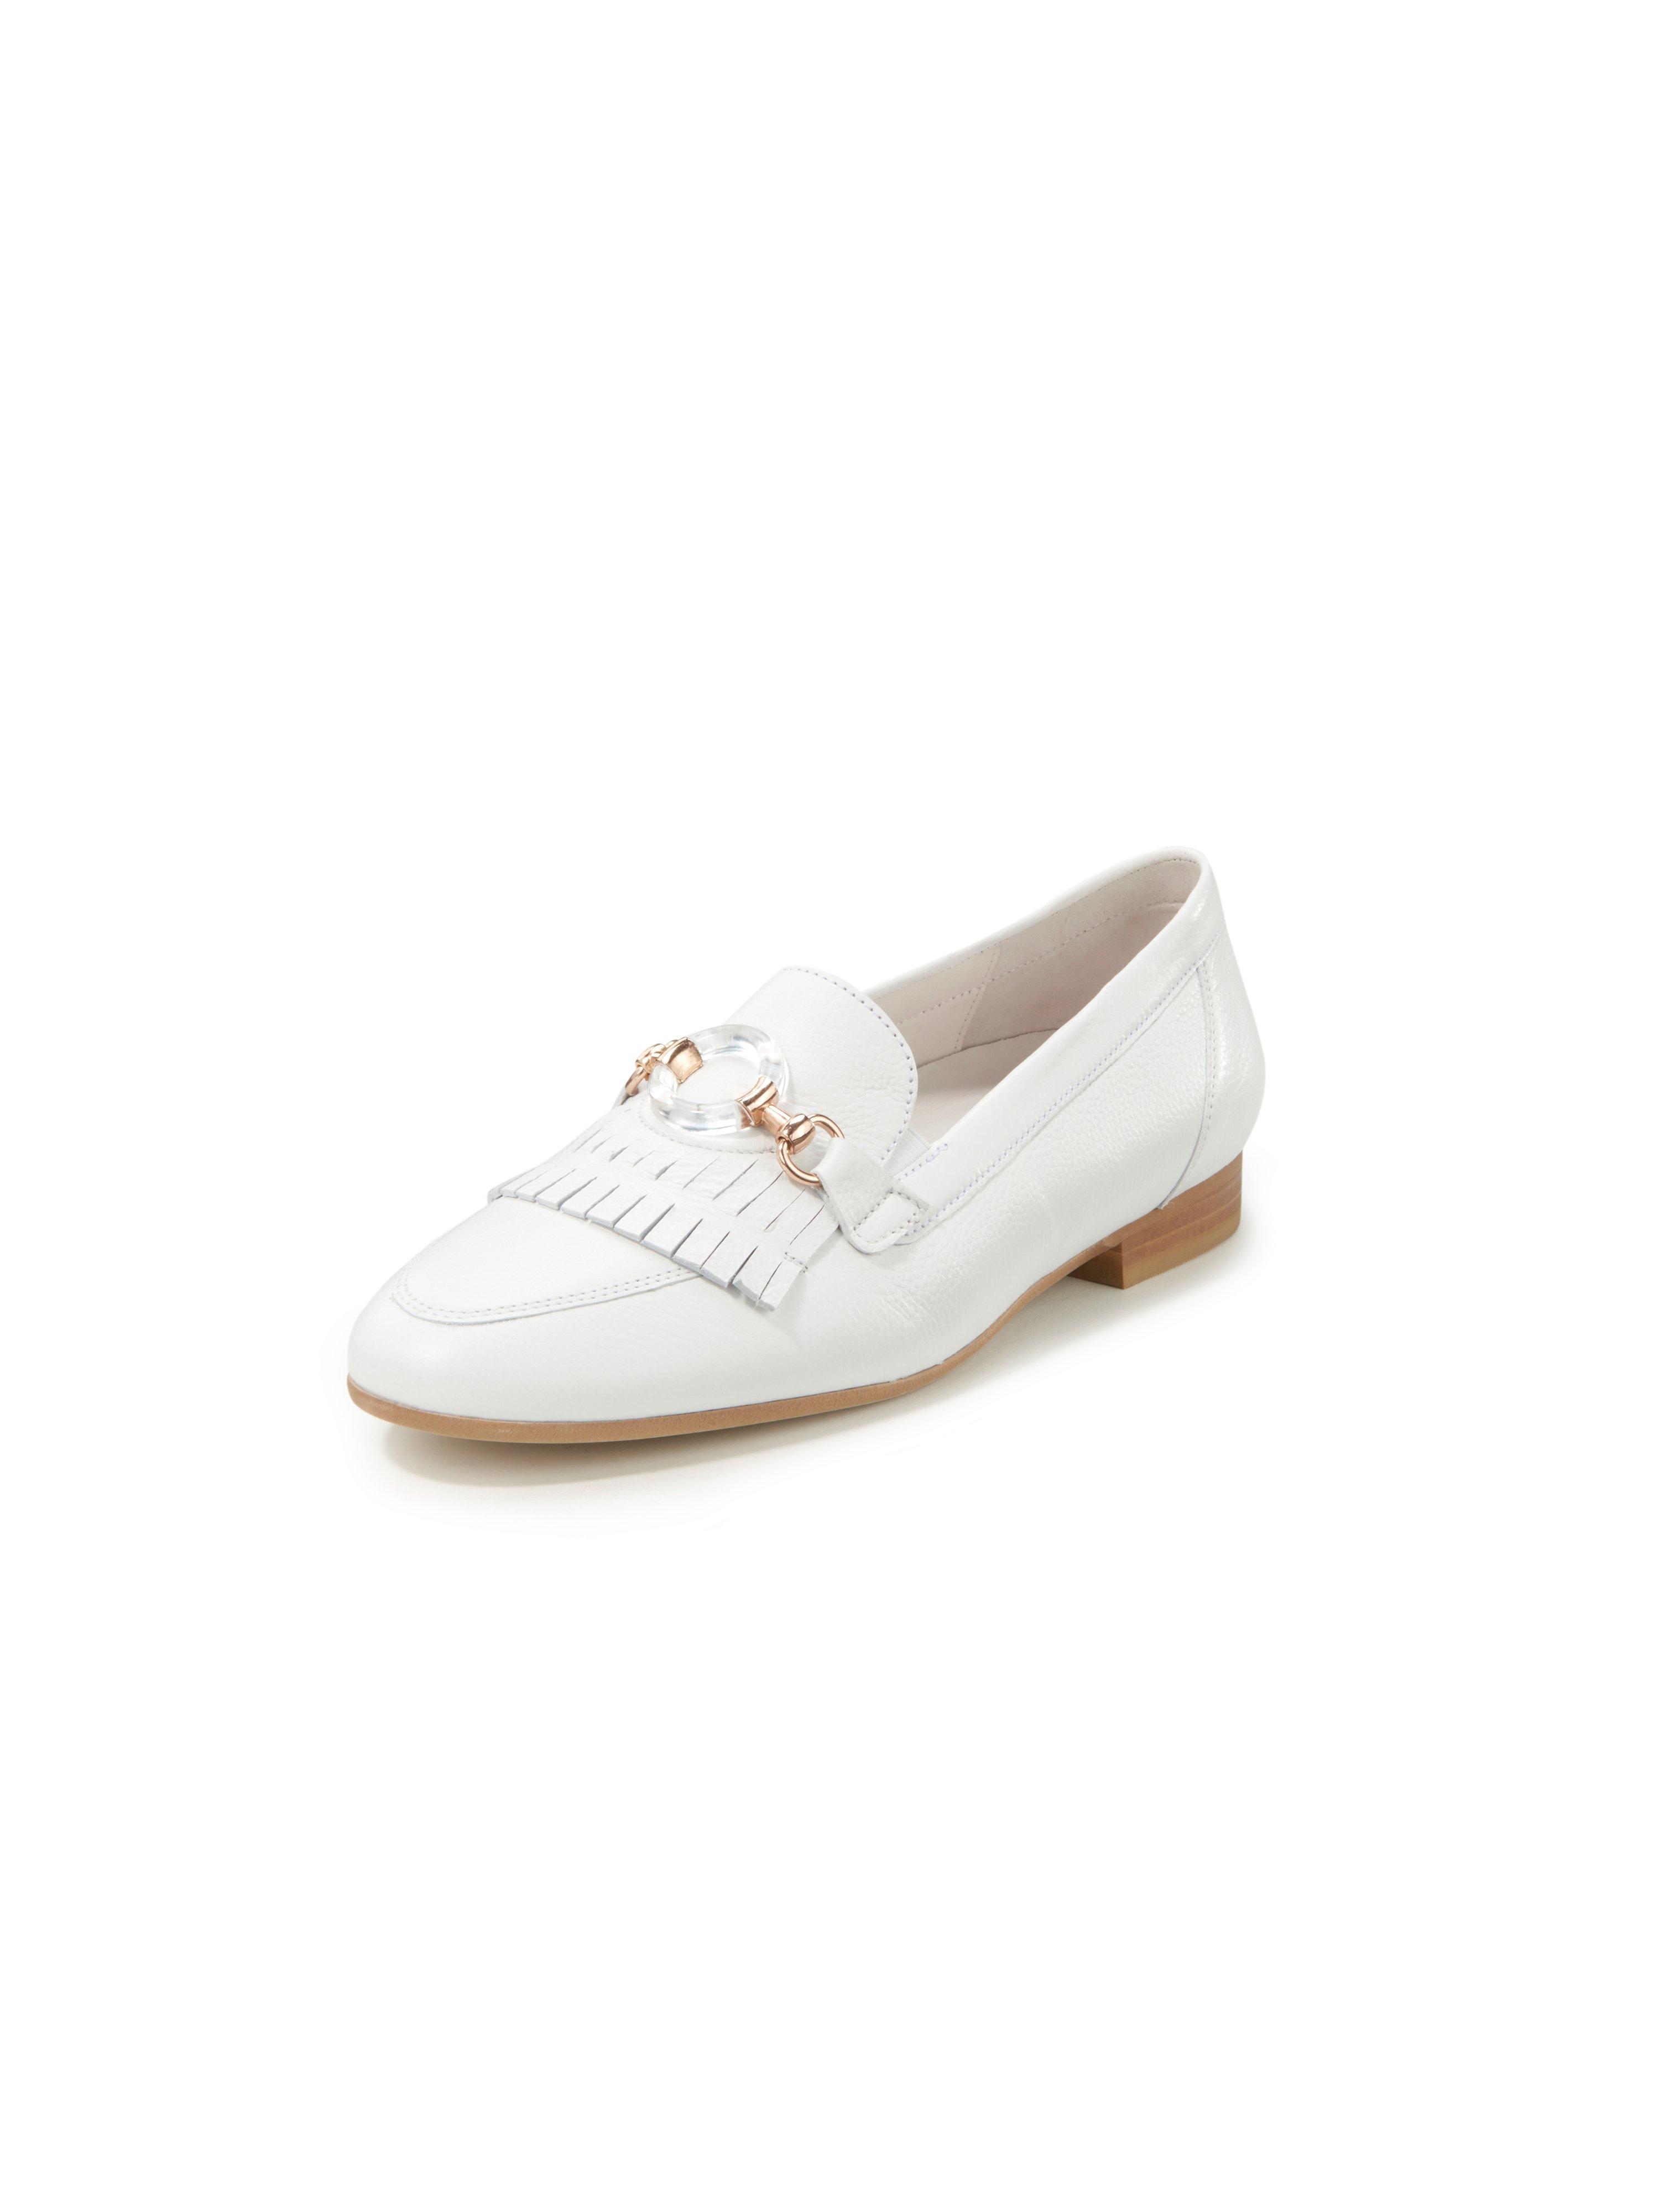 Gabor Comfort - Loafers with embellishment and fringe details - white